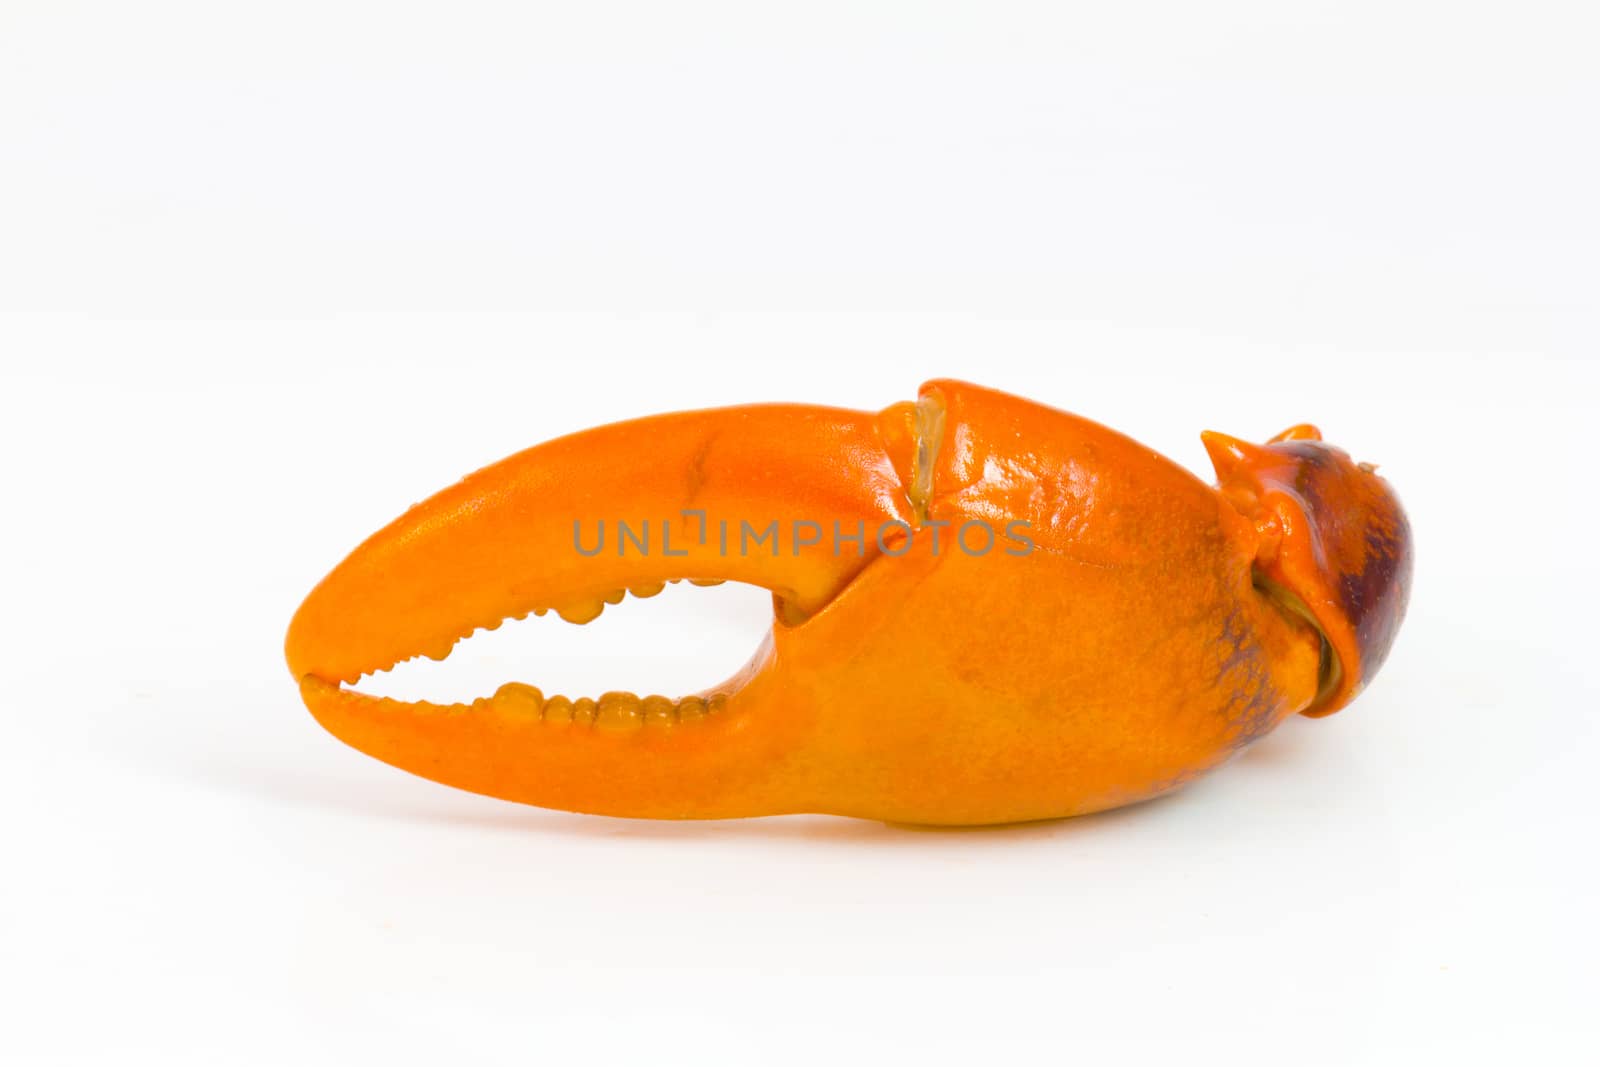 boiled crab claw  isolated on white